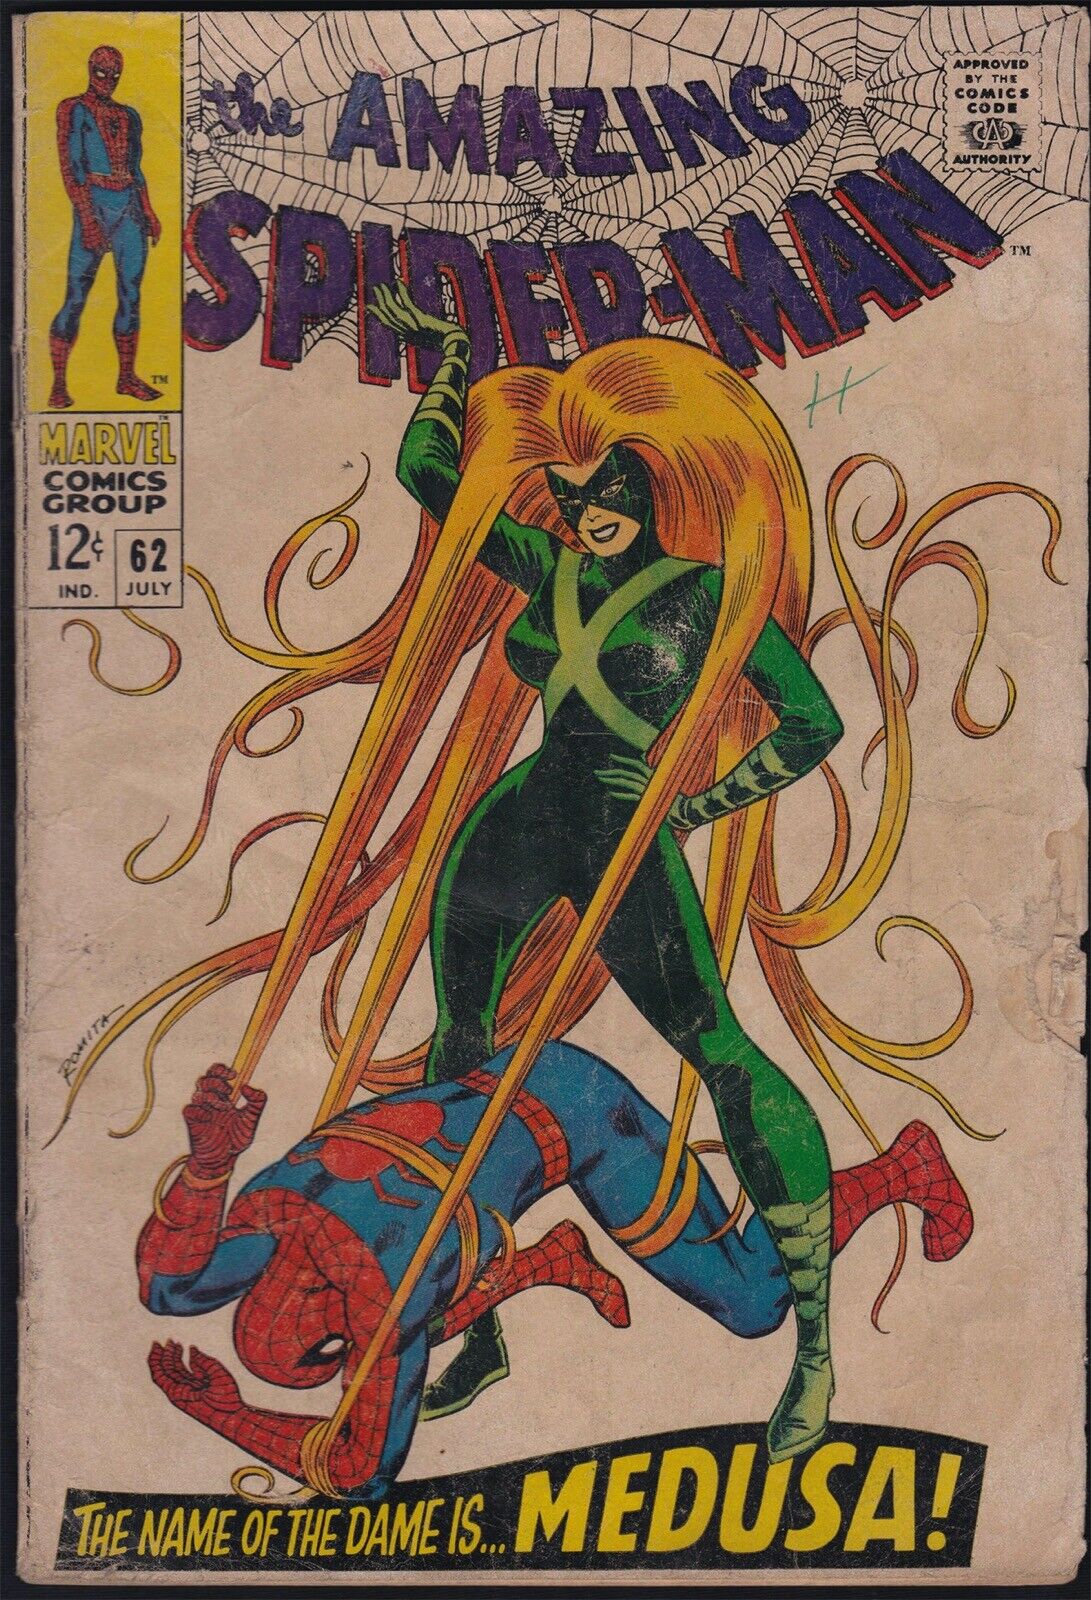 Marvel Comics AMAZING SPIDER-MAN #62 Medusa Early Appearance Low Grade